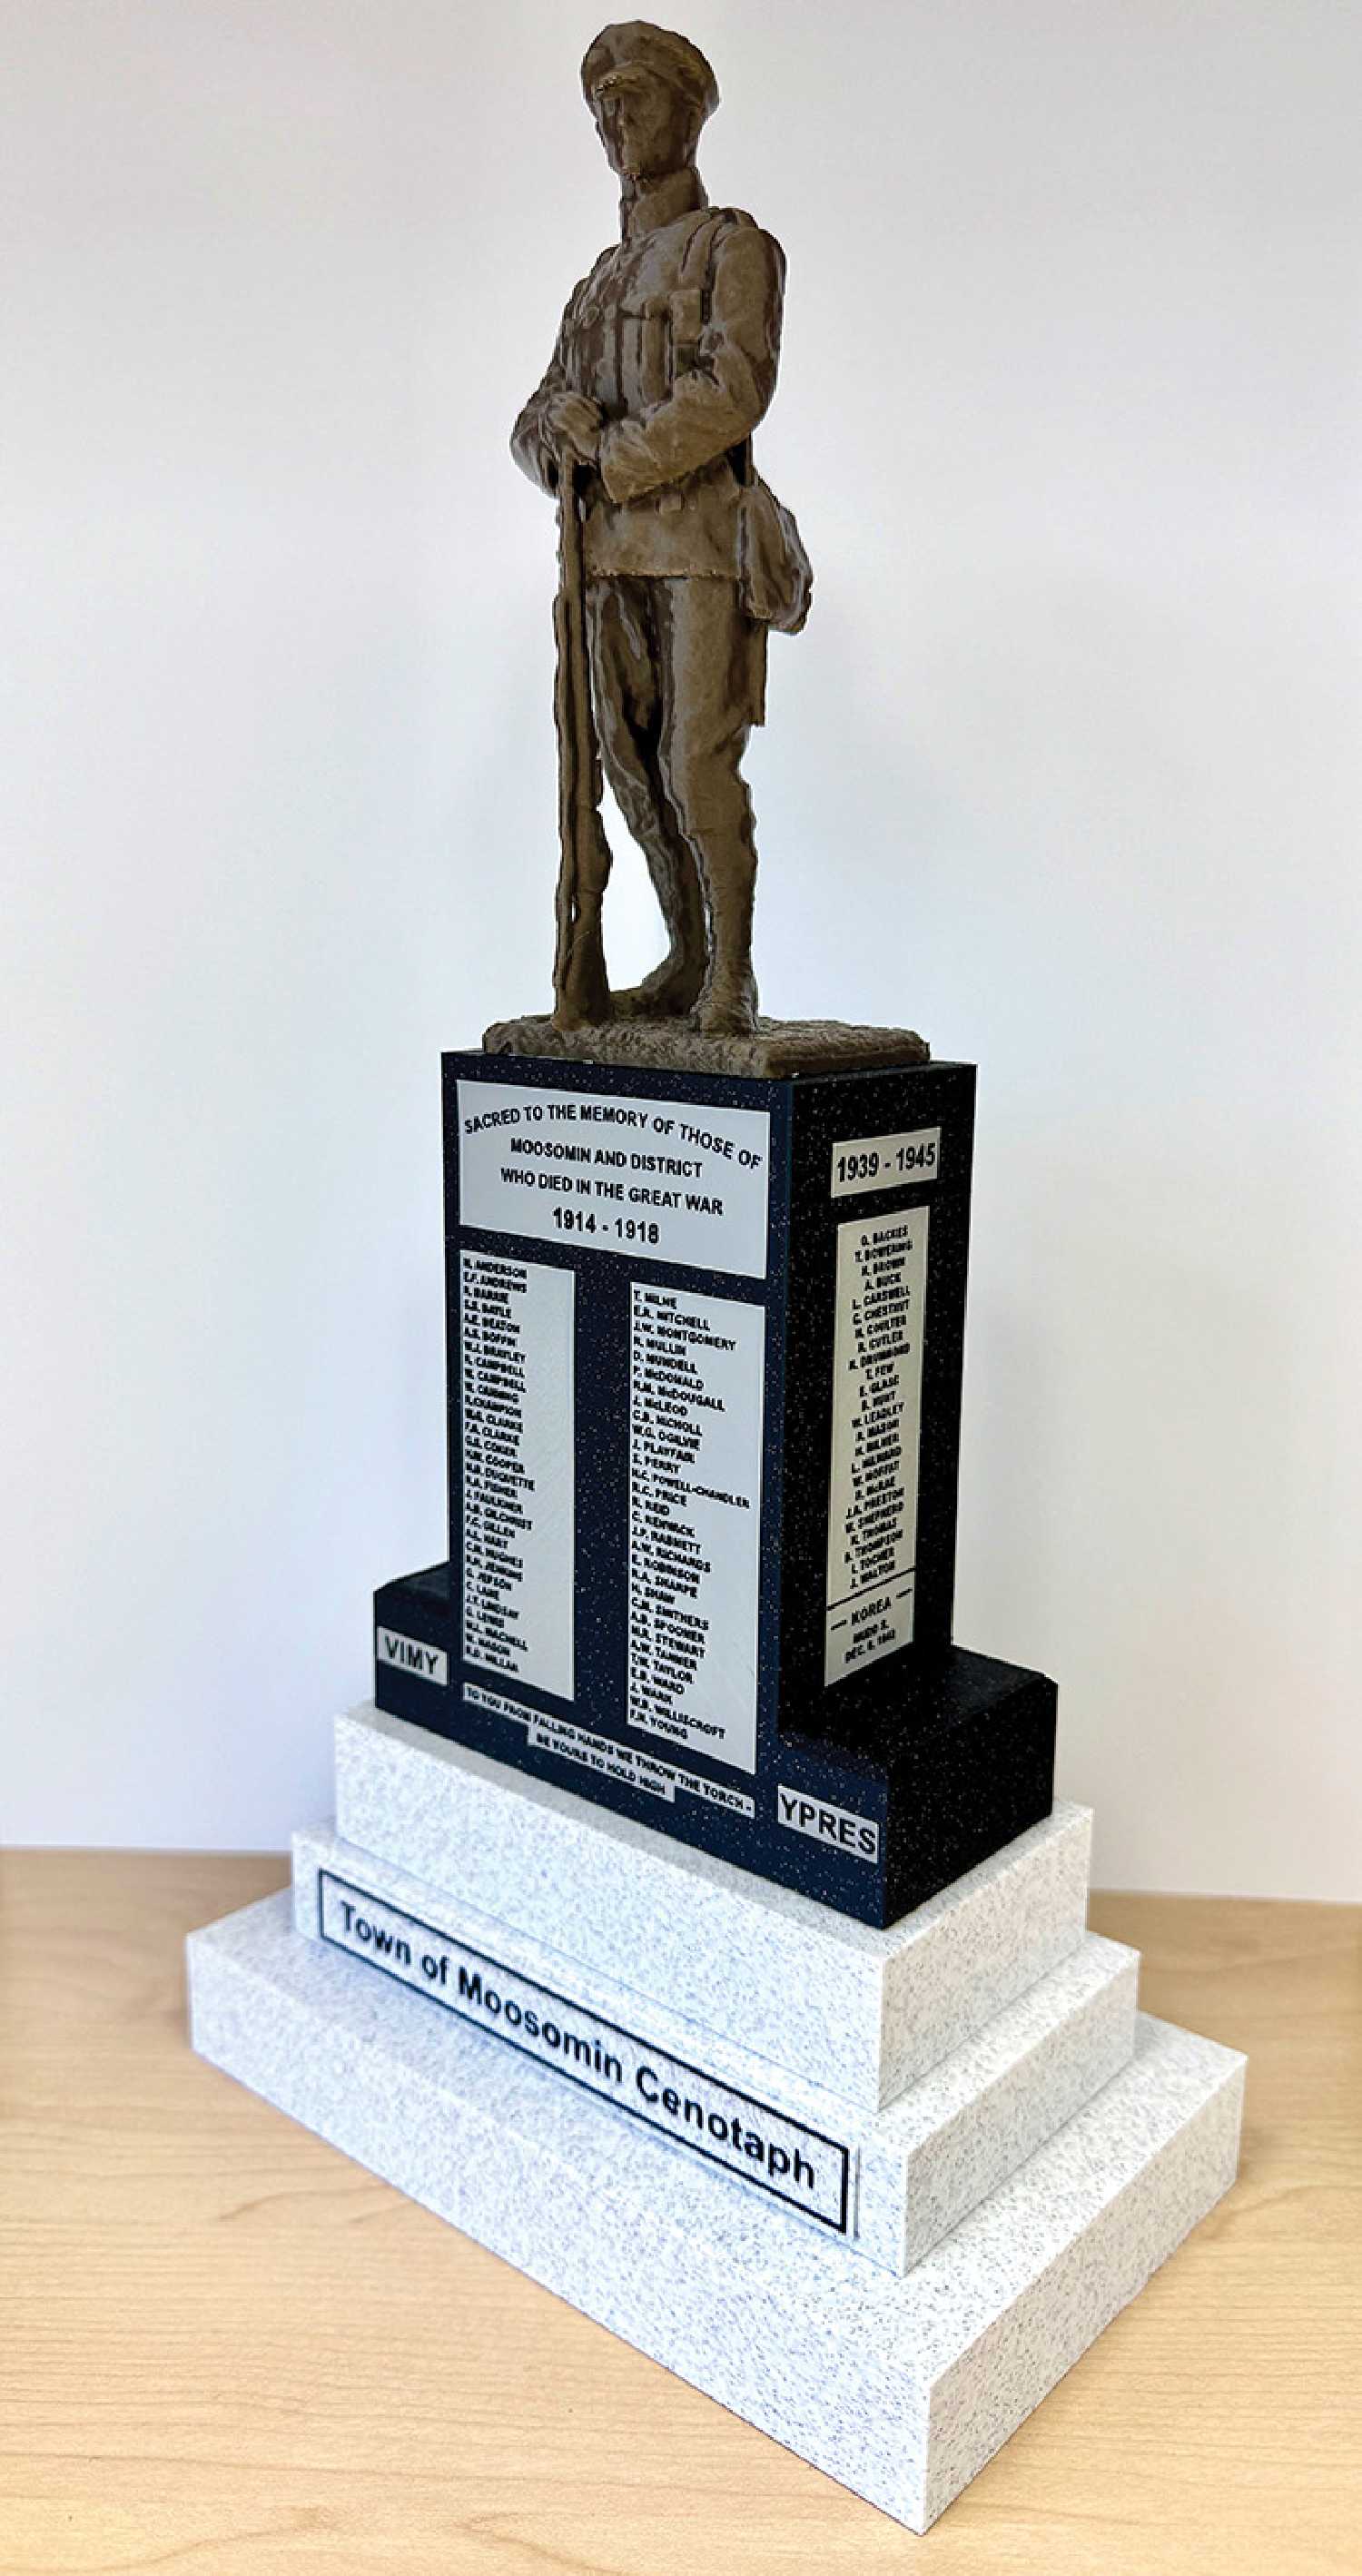 One of the 3D printed Moosomin Cenotaph replicas created by Joe and Riley St. Onge. The replicas are being sold for $100 as a fundraiser for the Moosomin Cenotaph centennial celebration.